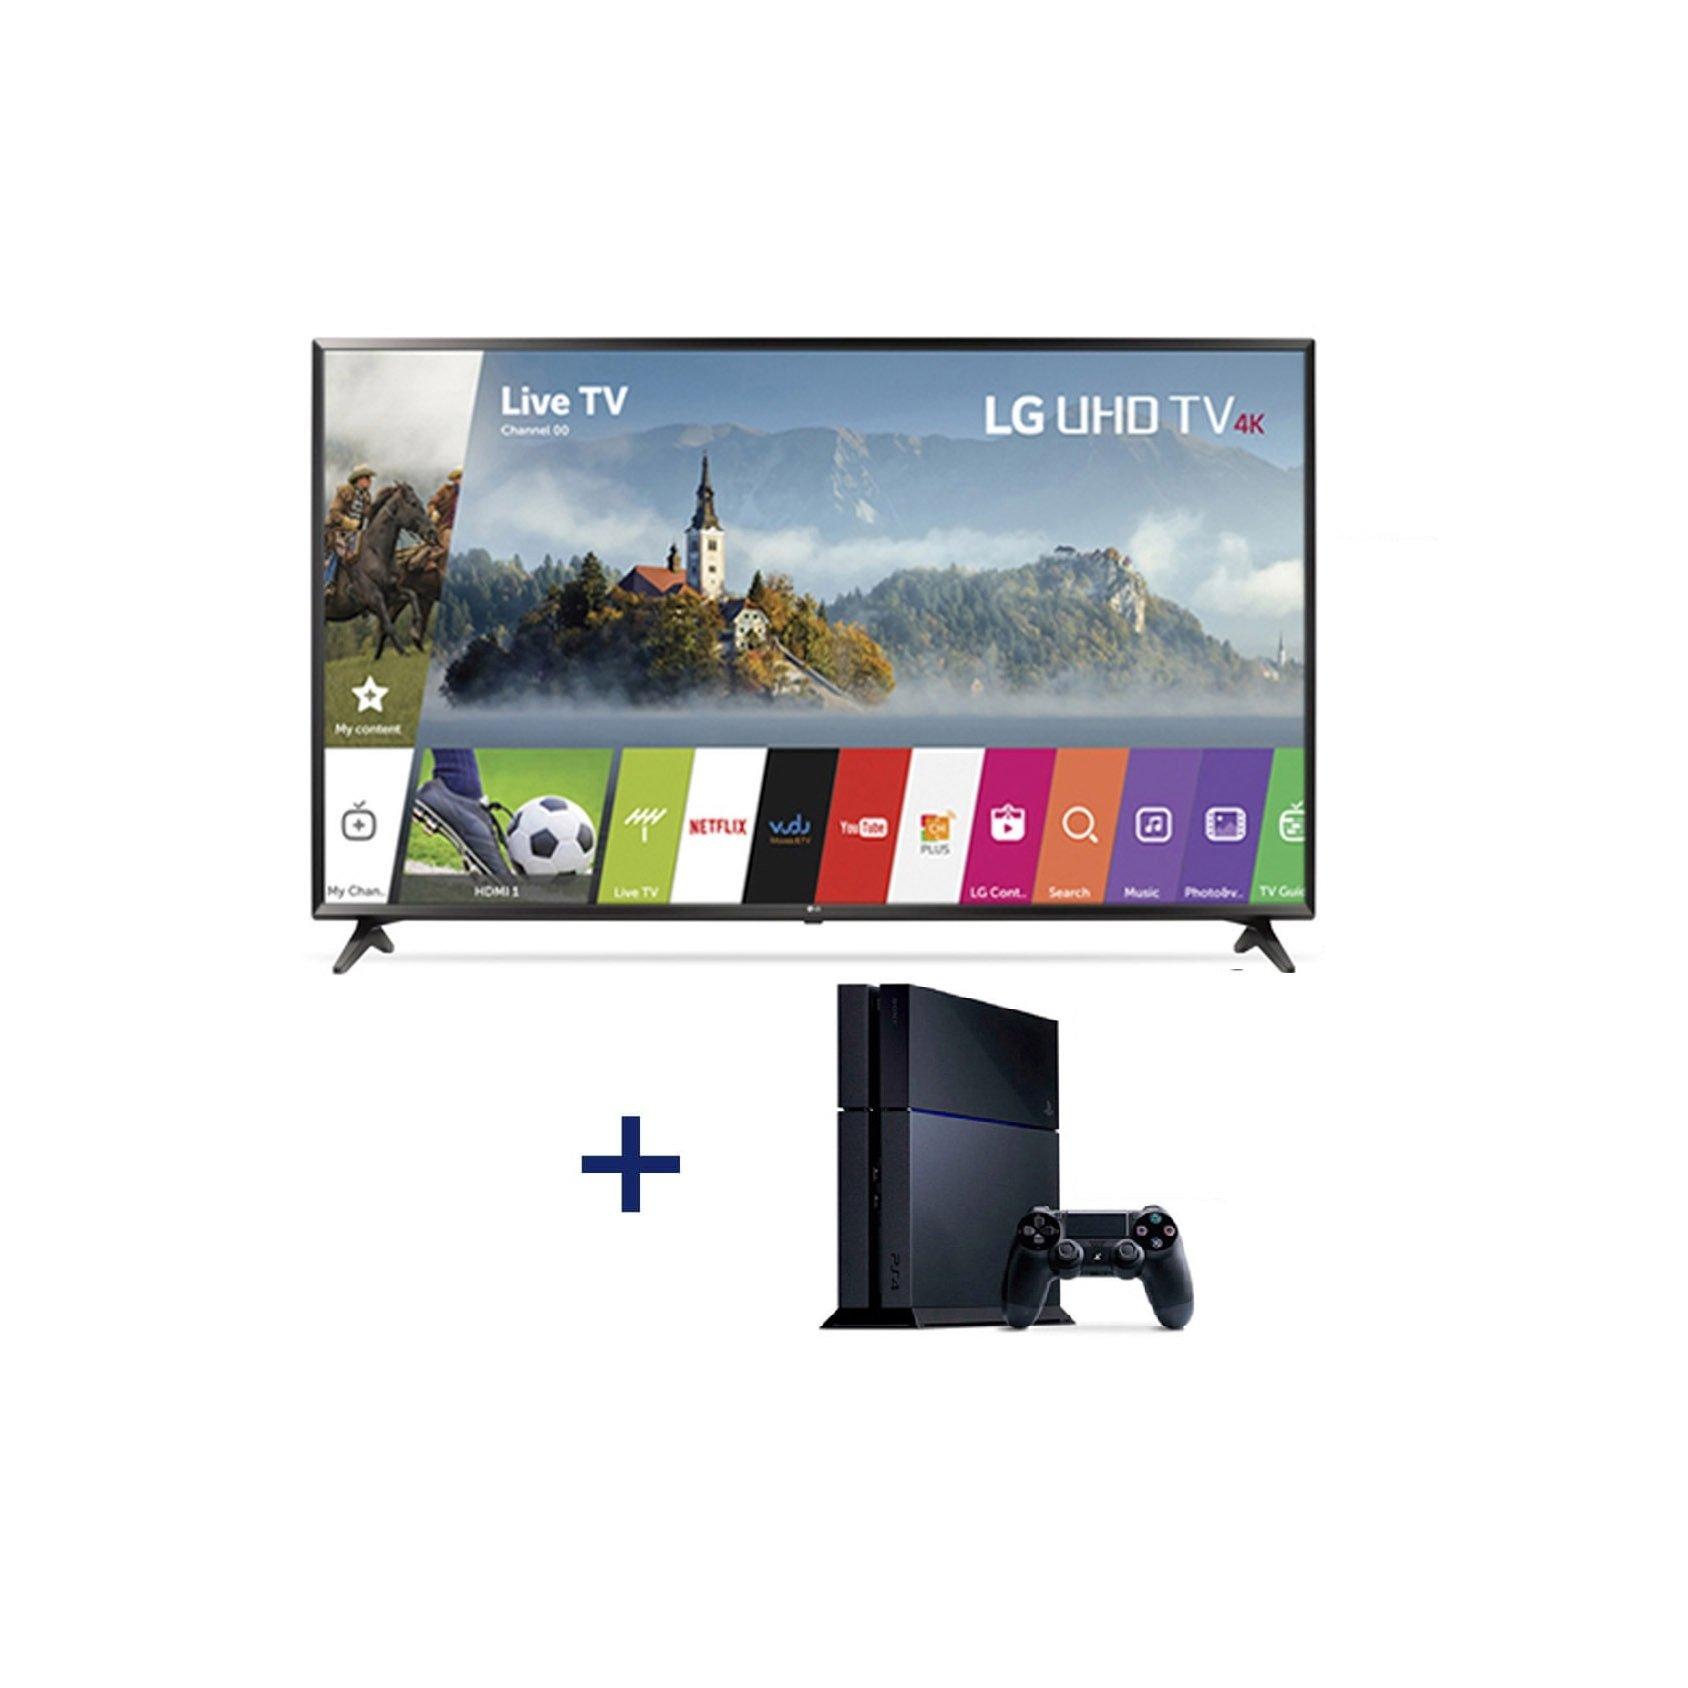 ps4 and tv bundle rent to own